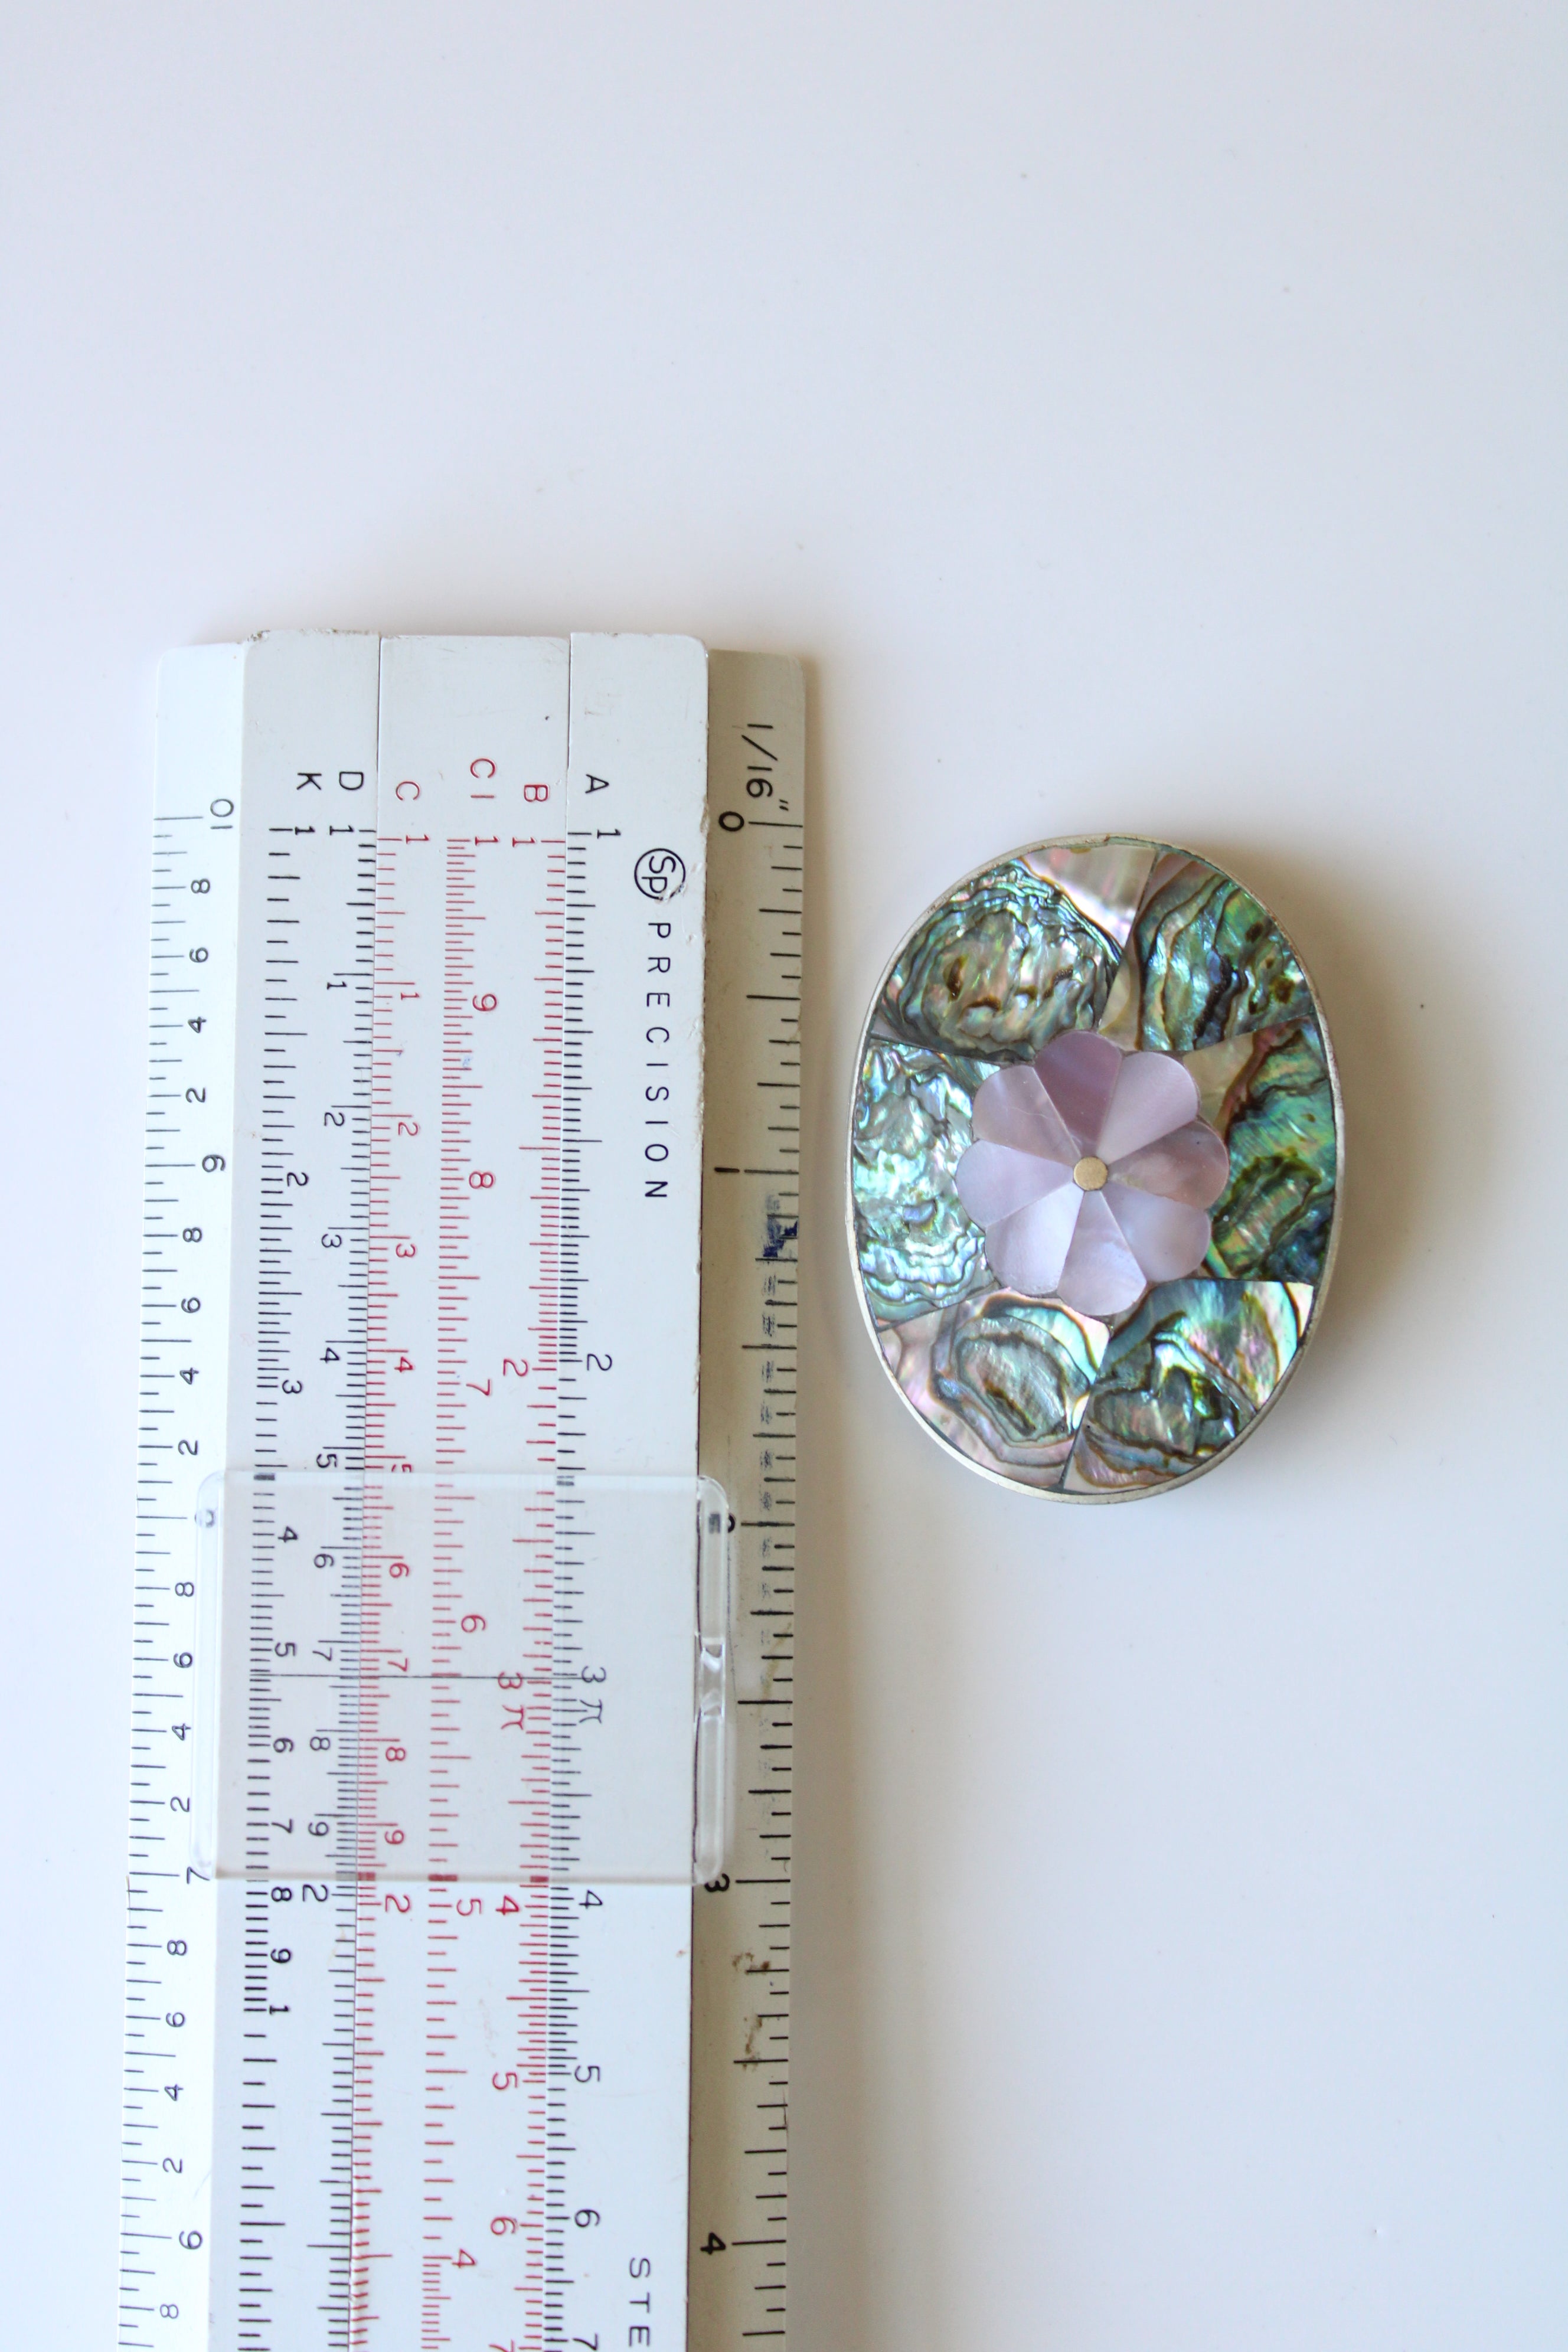 Abalone Flower Oval Pin